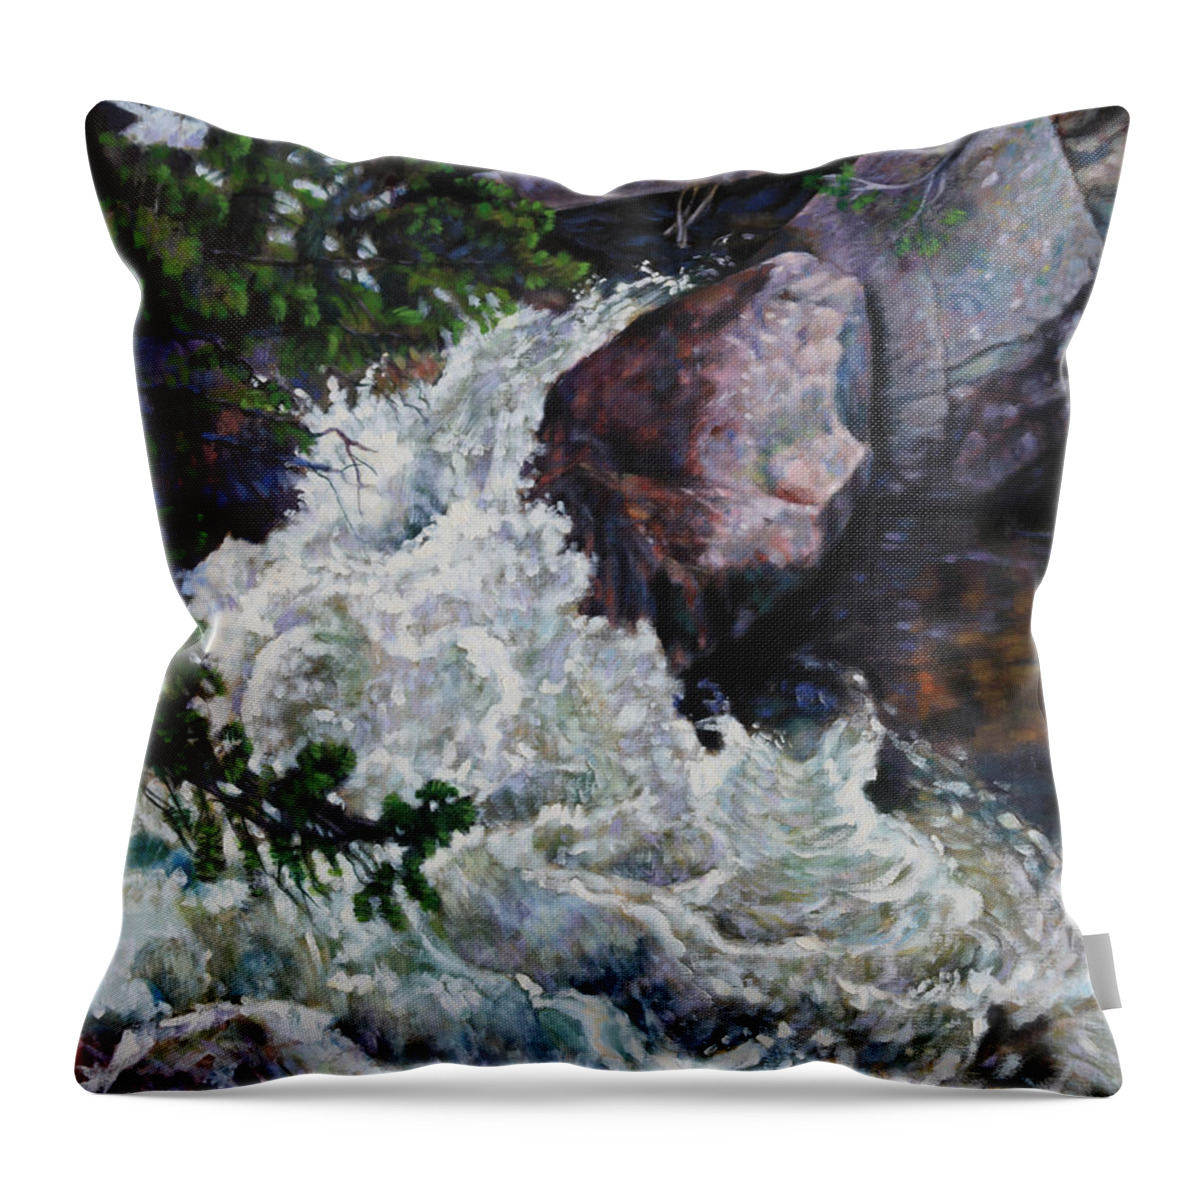 Waterfall Throw Pillow featuring the painting Rushing Stream Colorado by John Lautermilch